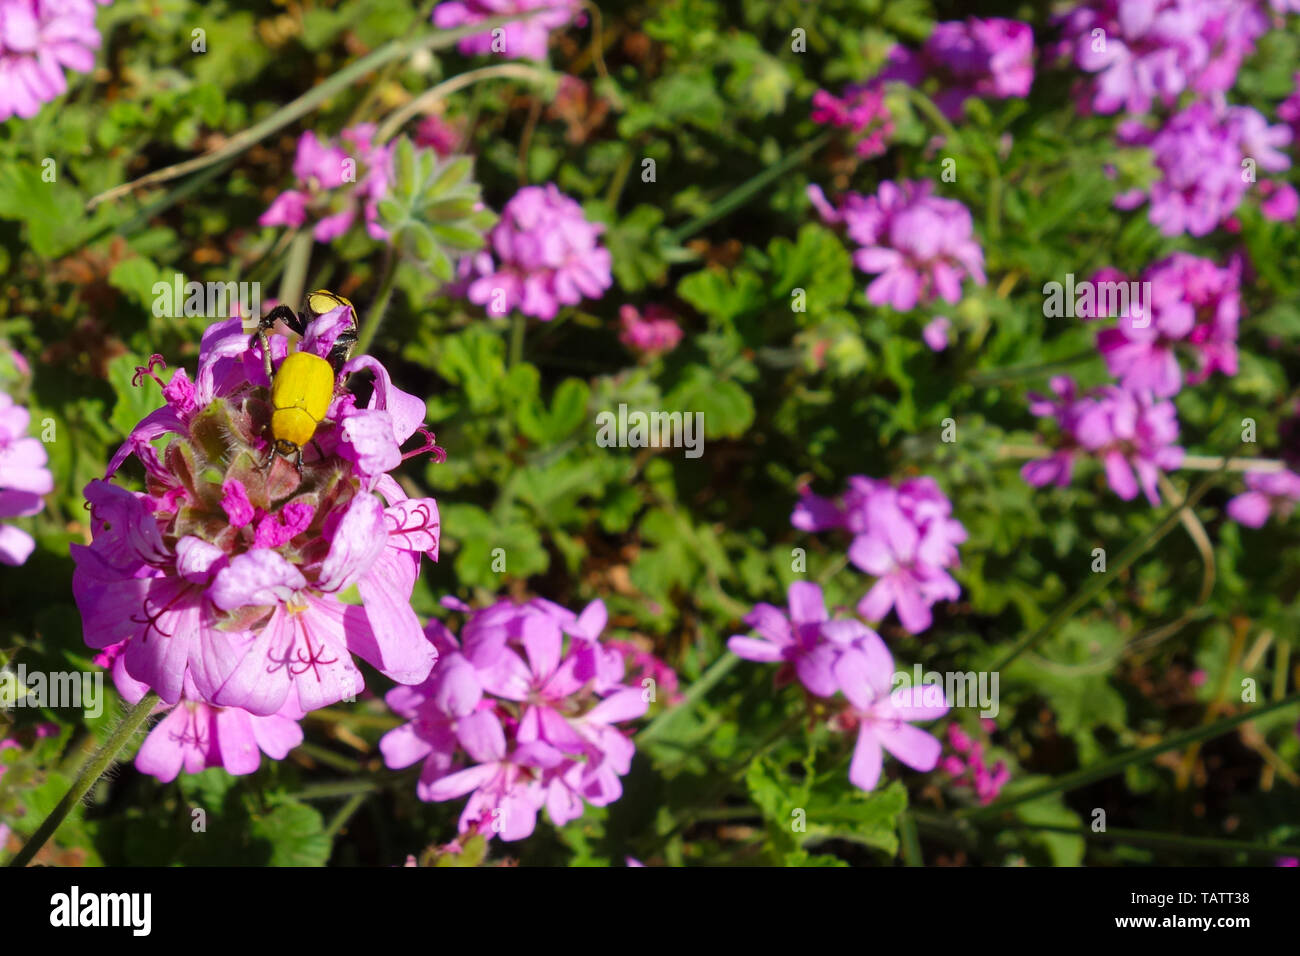 Yellow bug, Hoplia africana, sitting on violet flowers in a garden in Rabat, Morocco Stock Photo